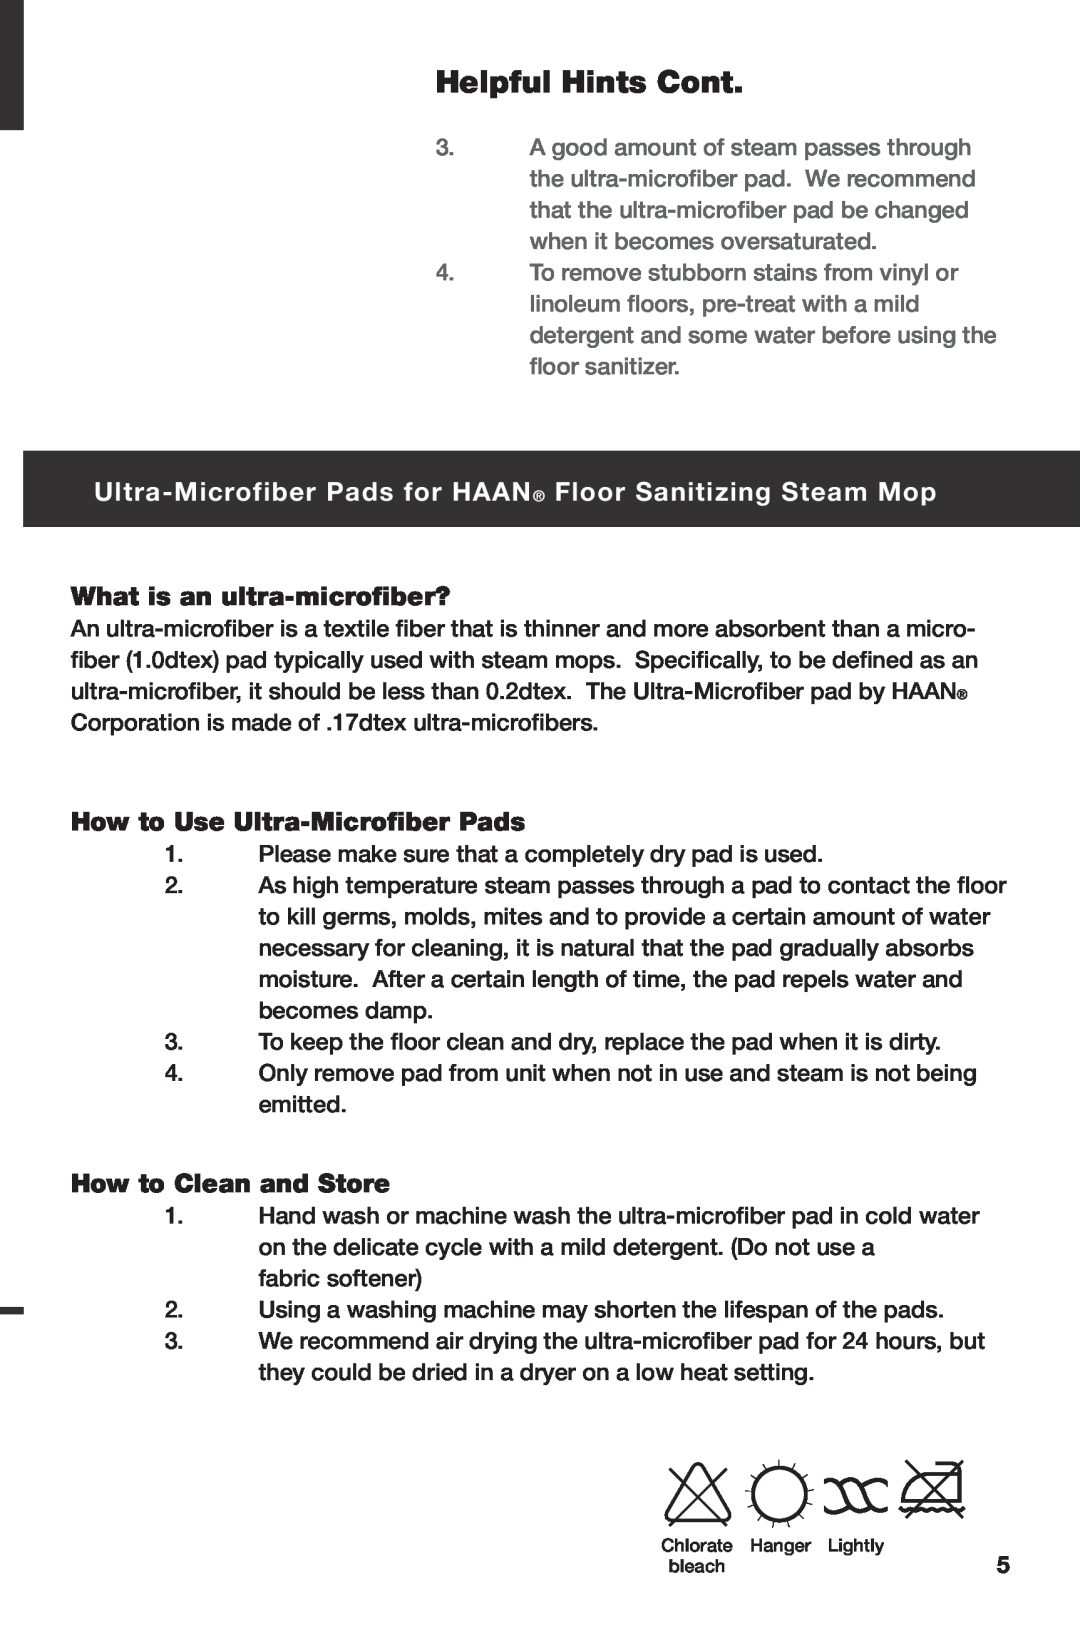 Haan SI-75 Helpful Hints Cont, Ultra-Microfiber Pads for HAAN Floor Sanitizing Steam Mop, What is an ultra-microfiber? 